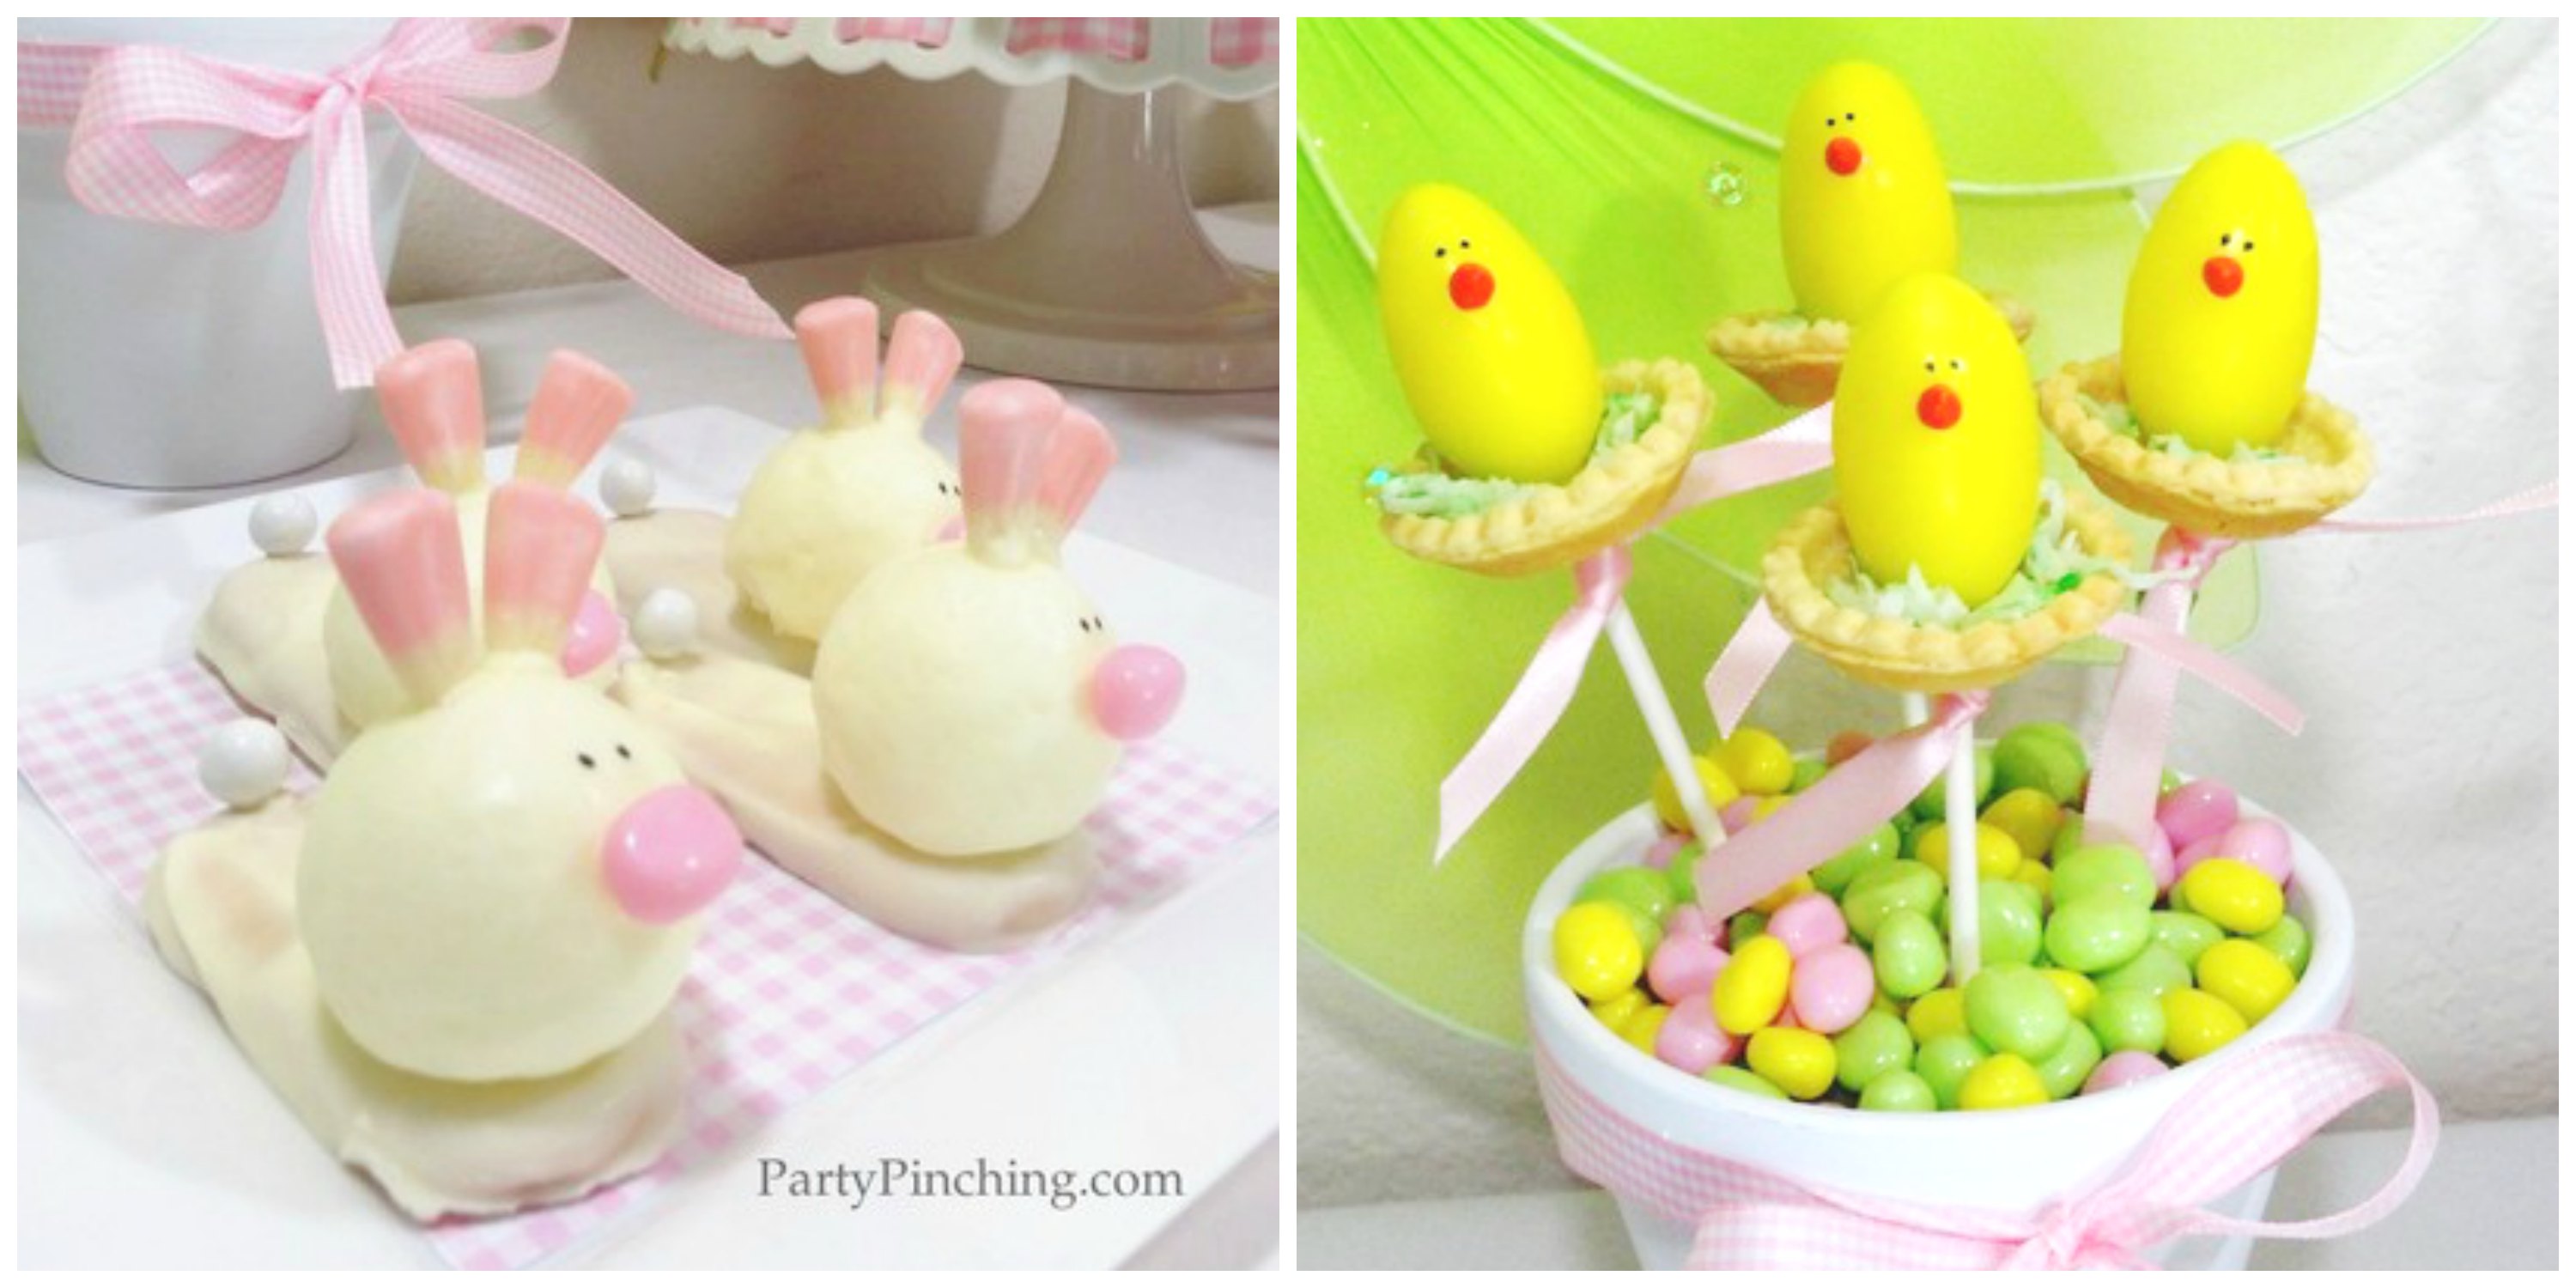 Brach's at it again with Easter Brunch Jelly Beans! 👀 Found at